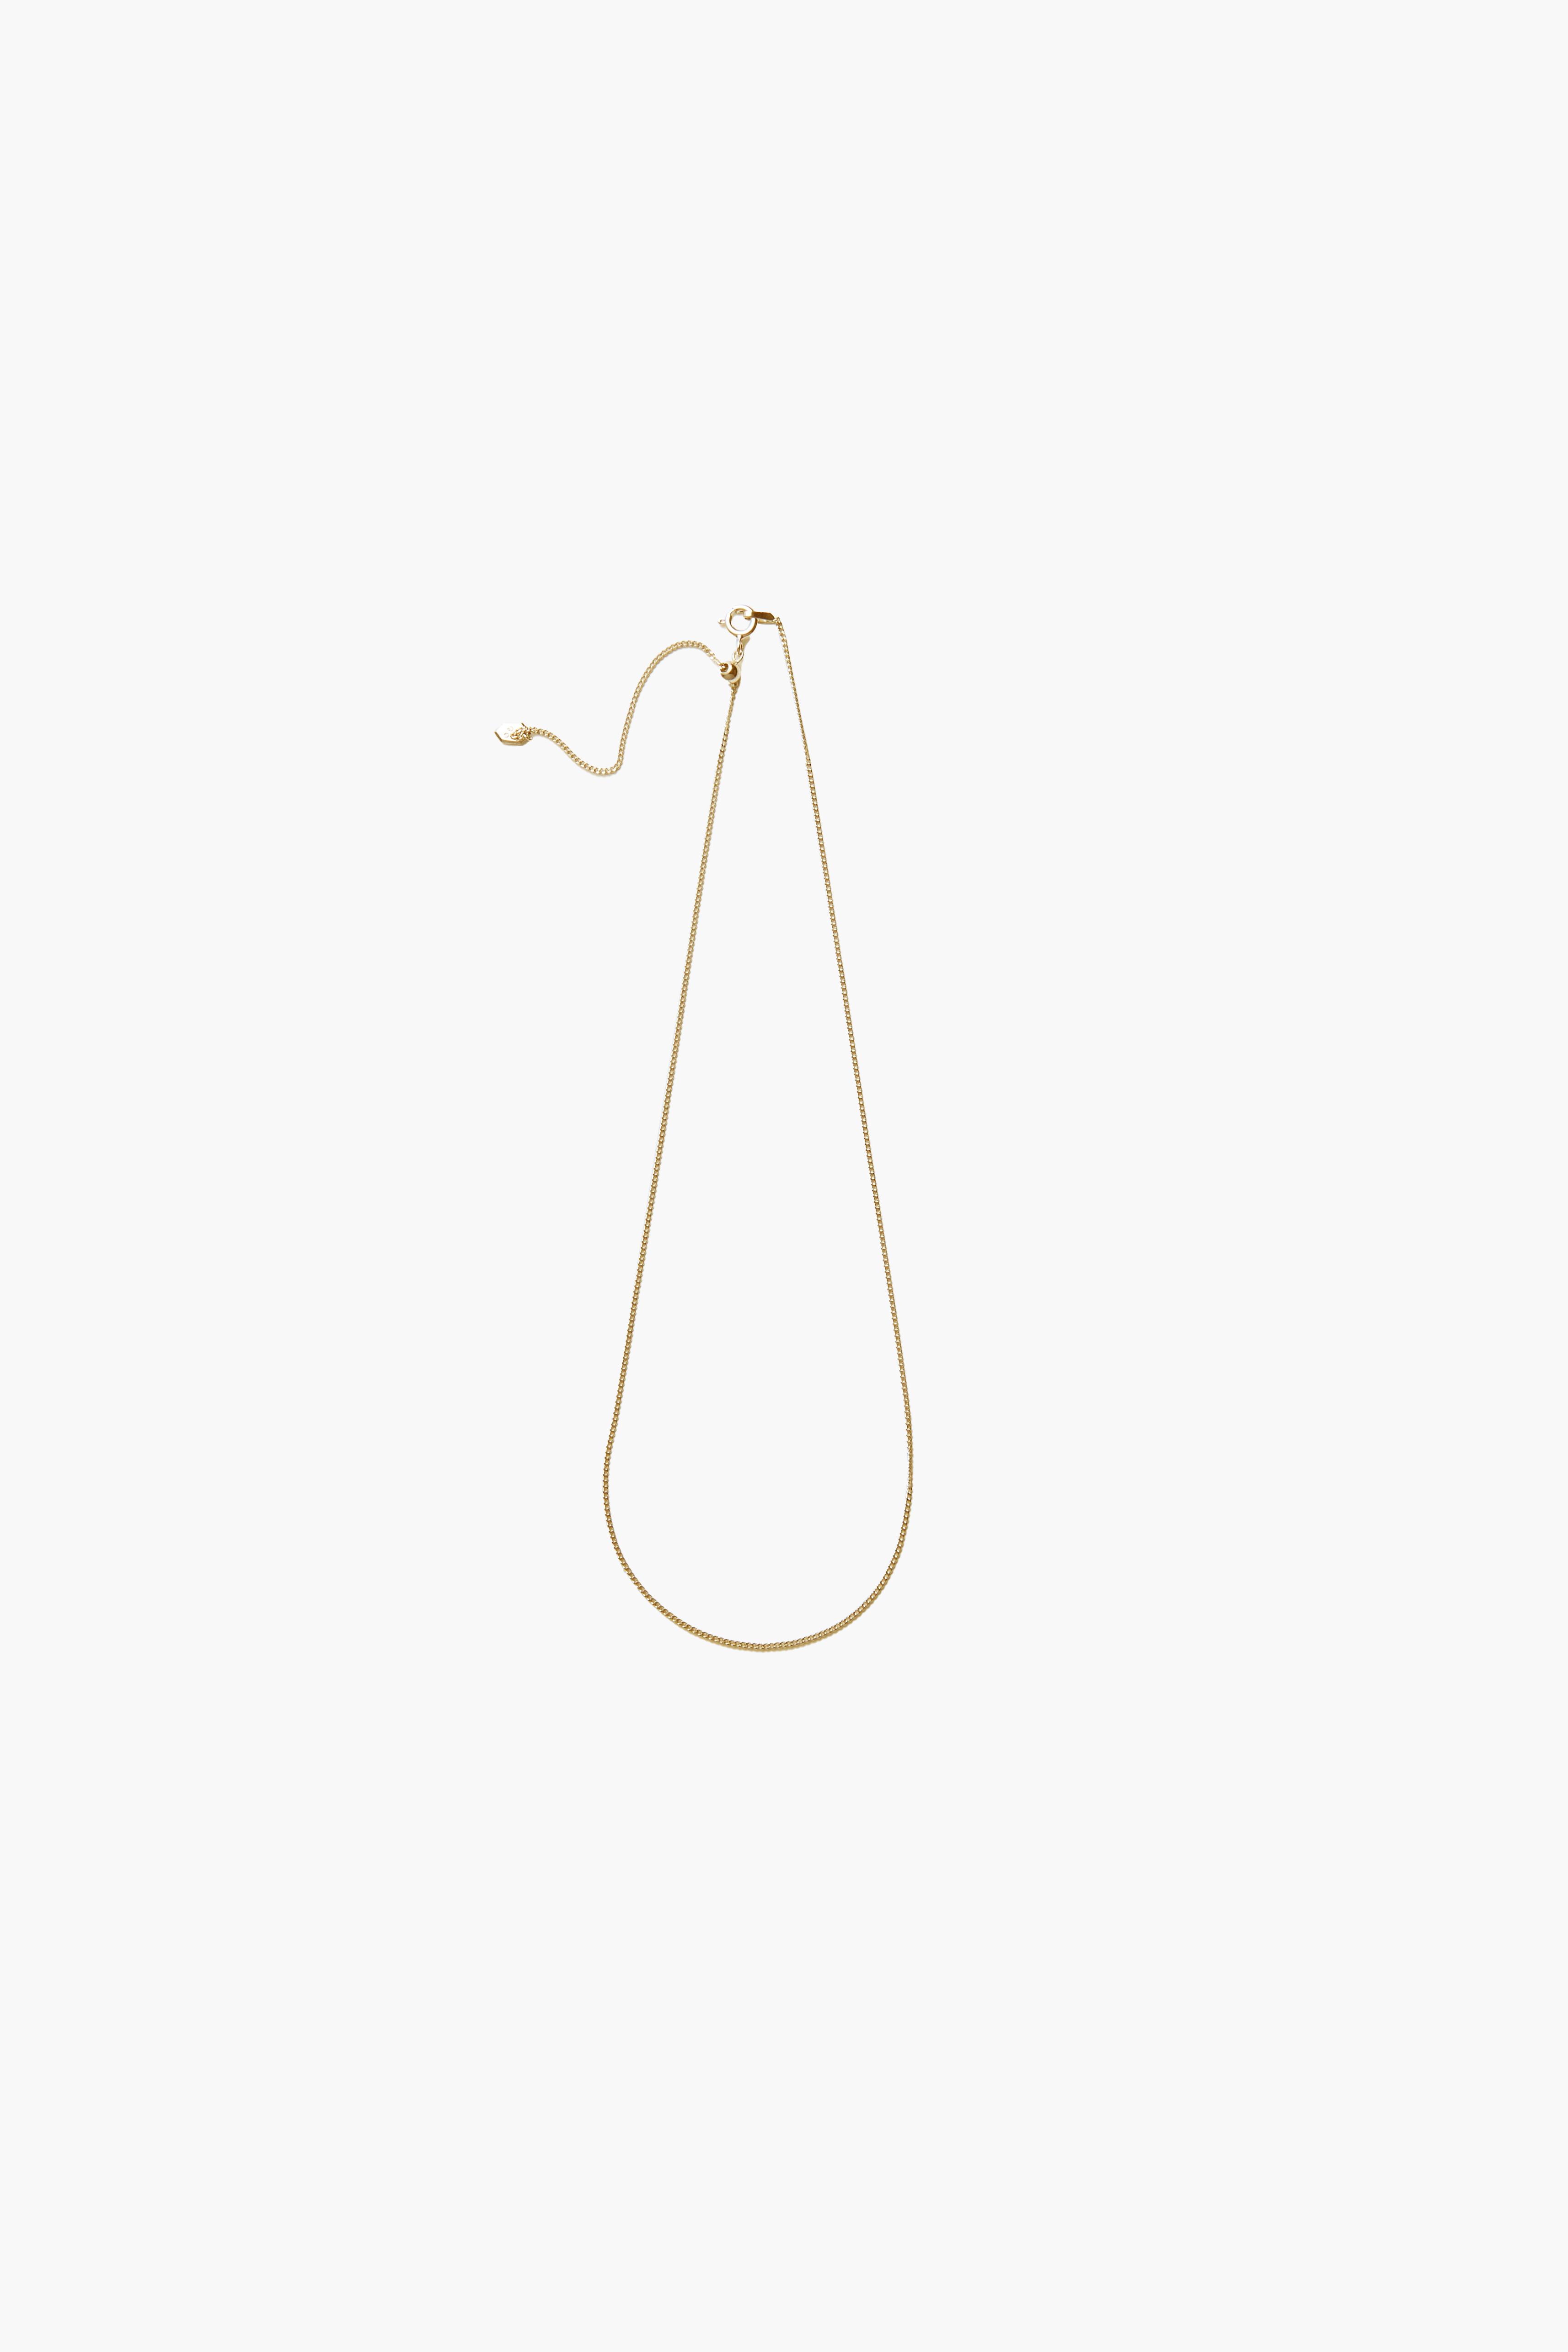 Nyhavn 45 Necklace - Yellow Gold